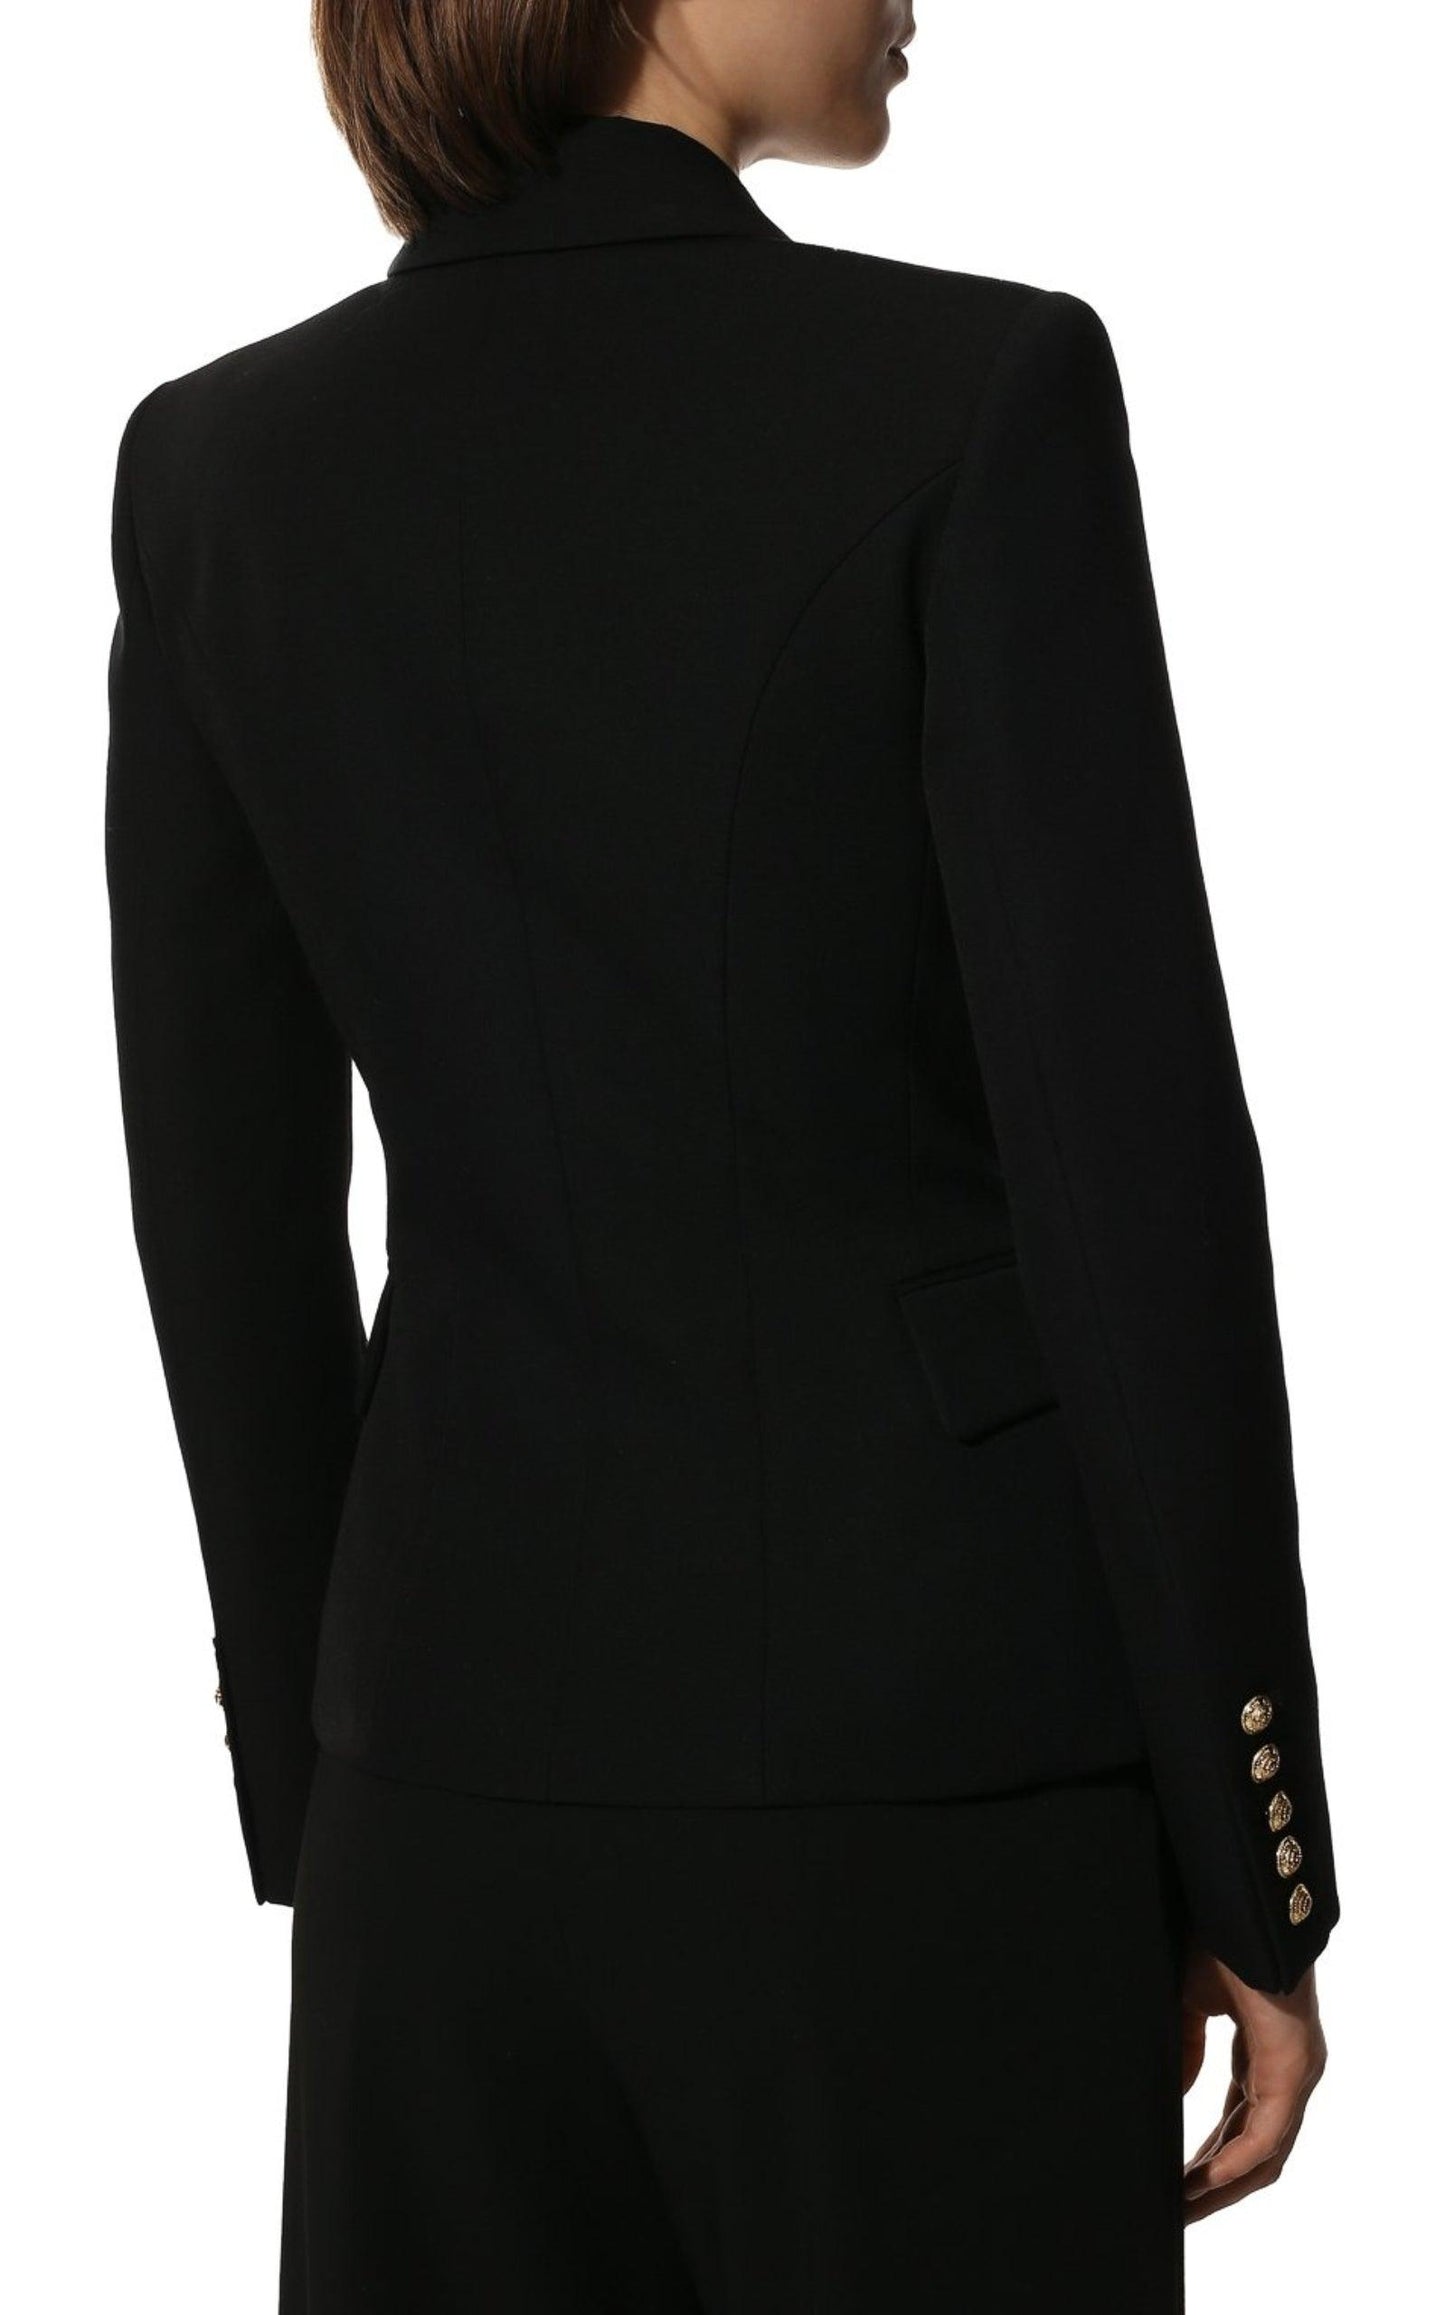 Black Wool Classic Double-Breasted Blazer